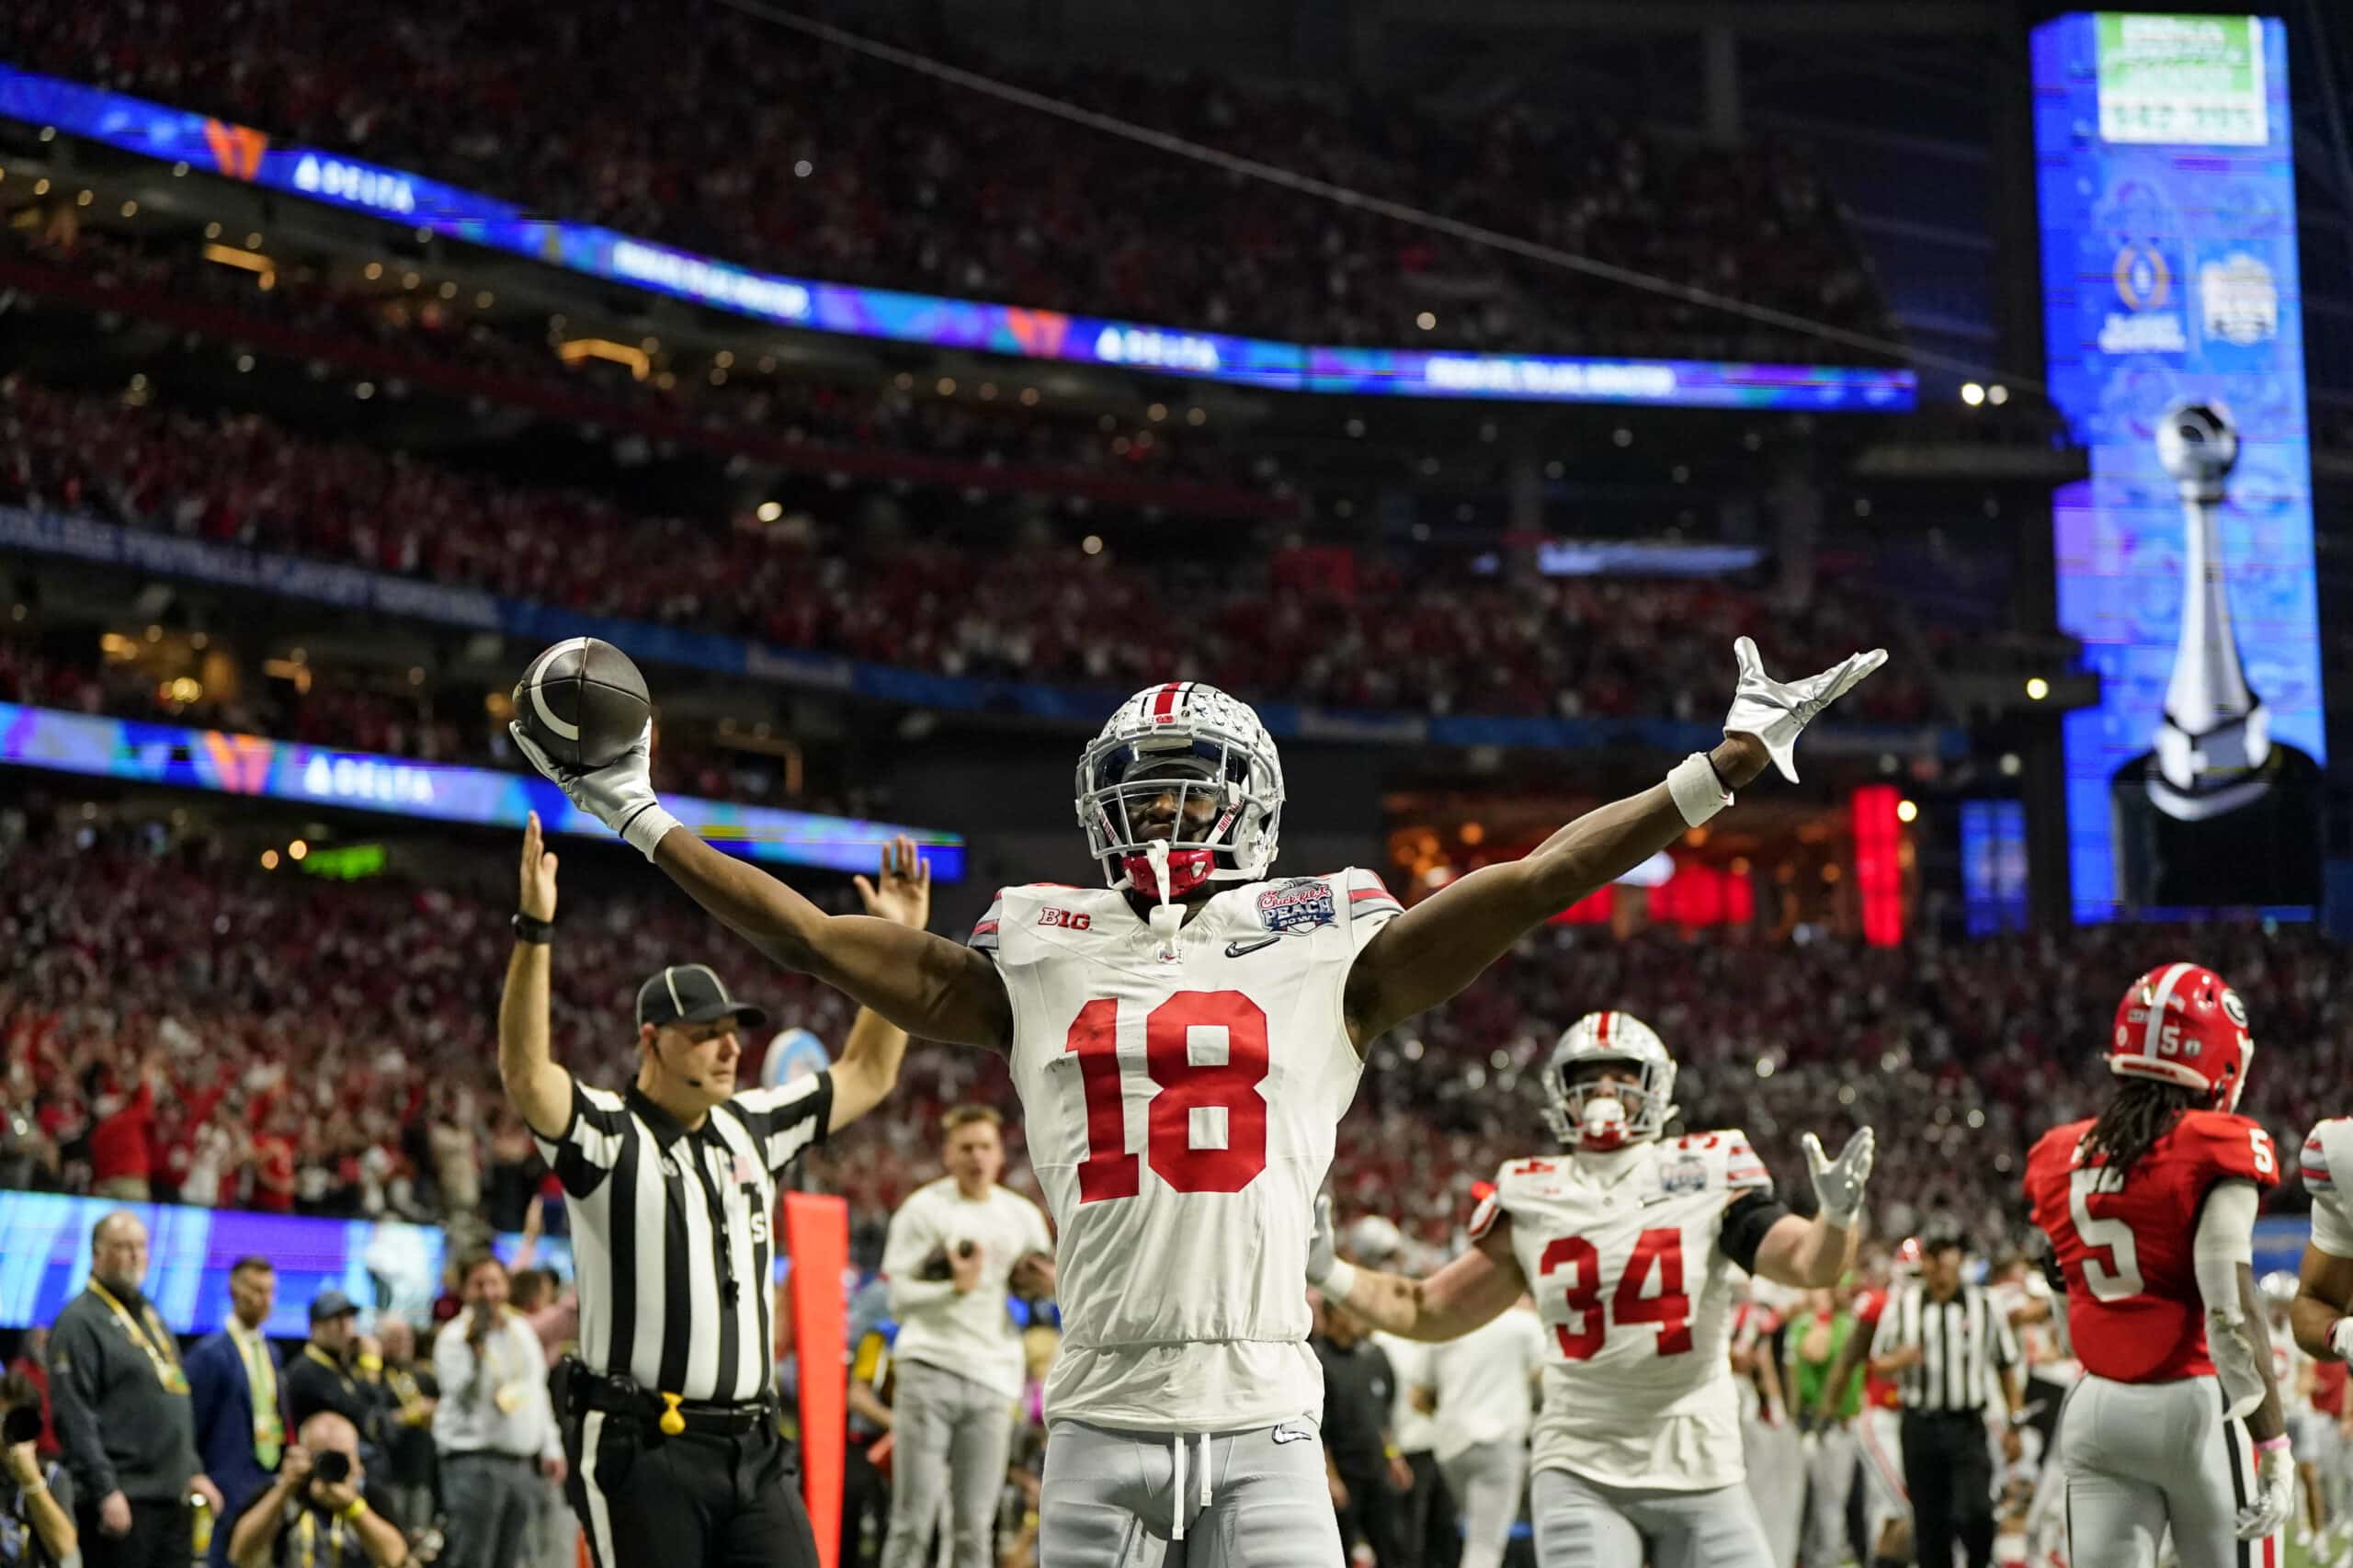 Dec 31, 2022; Atlanta, Georgia, USA; Ohio State Buckeyes wide receiver Marvin Harrison Jr. (18) reacts after scoring a touchdown against the Georgia Bulldogs during the second quarter of the 2022 Peach Bowl at Mercedes-Benz Stadium.